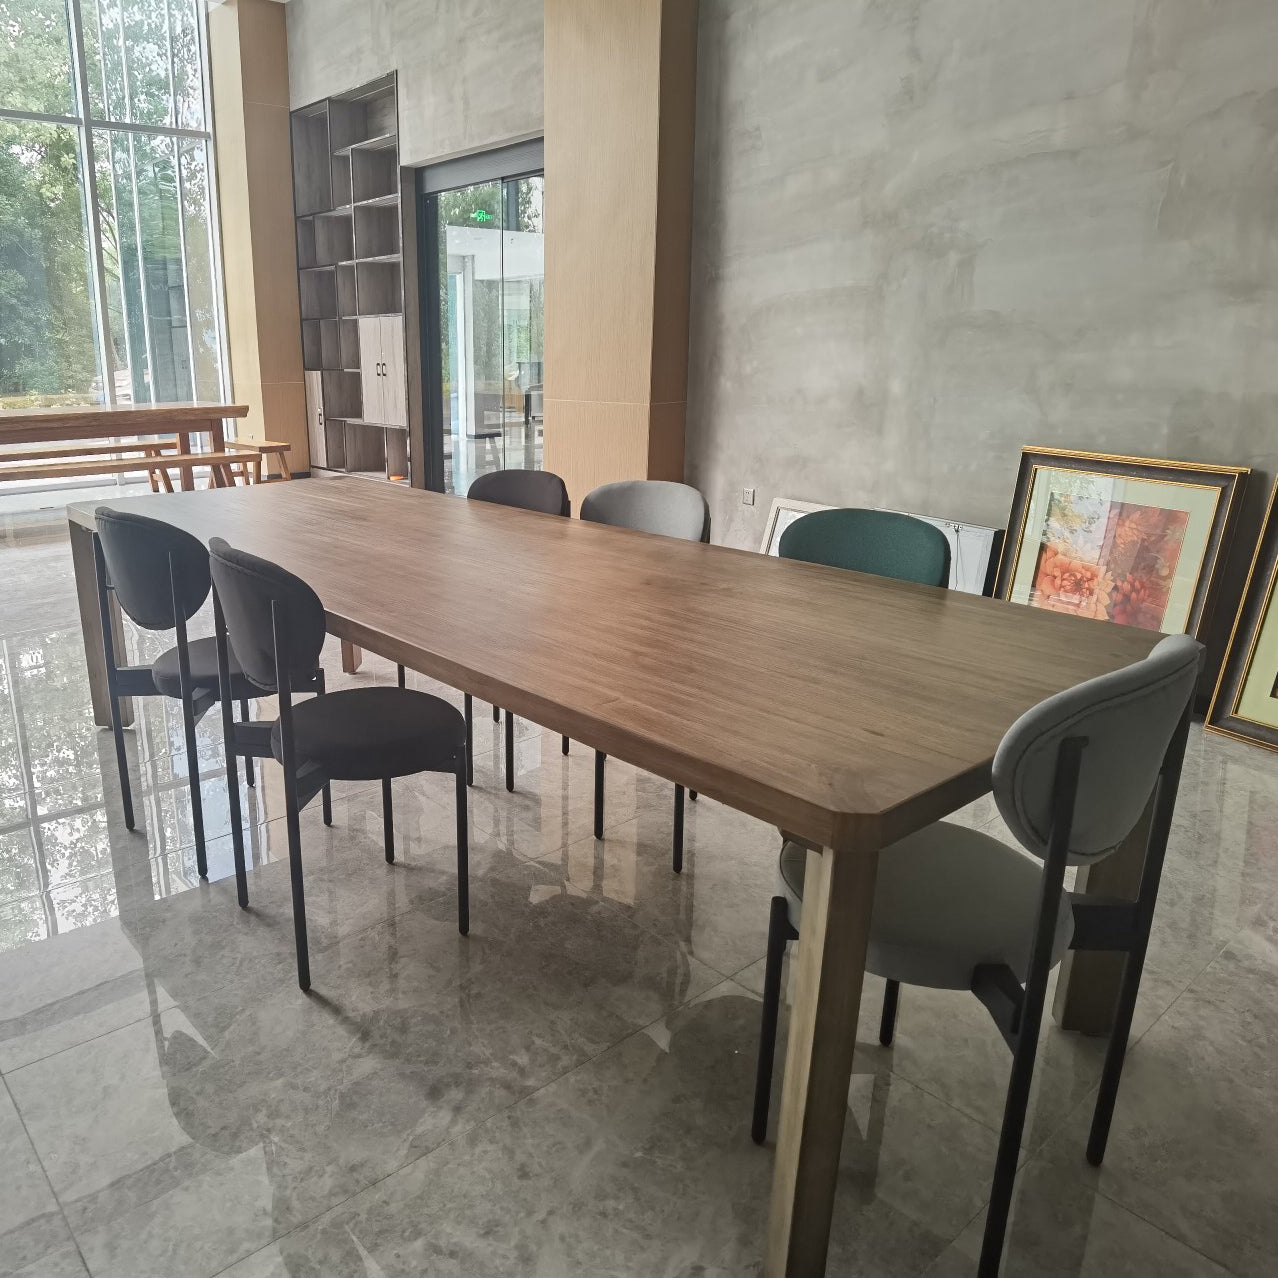 Contemporary Dining Table Solid Wood Table with 4 Legs for Dining Room